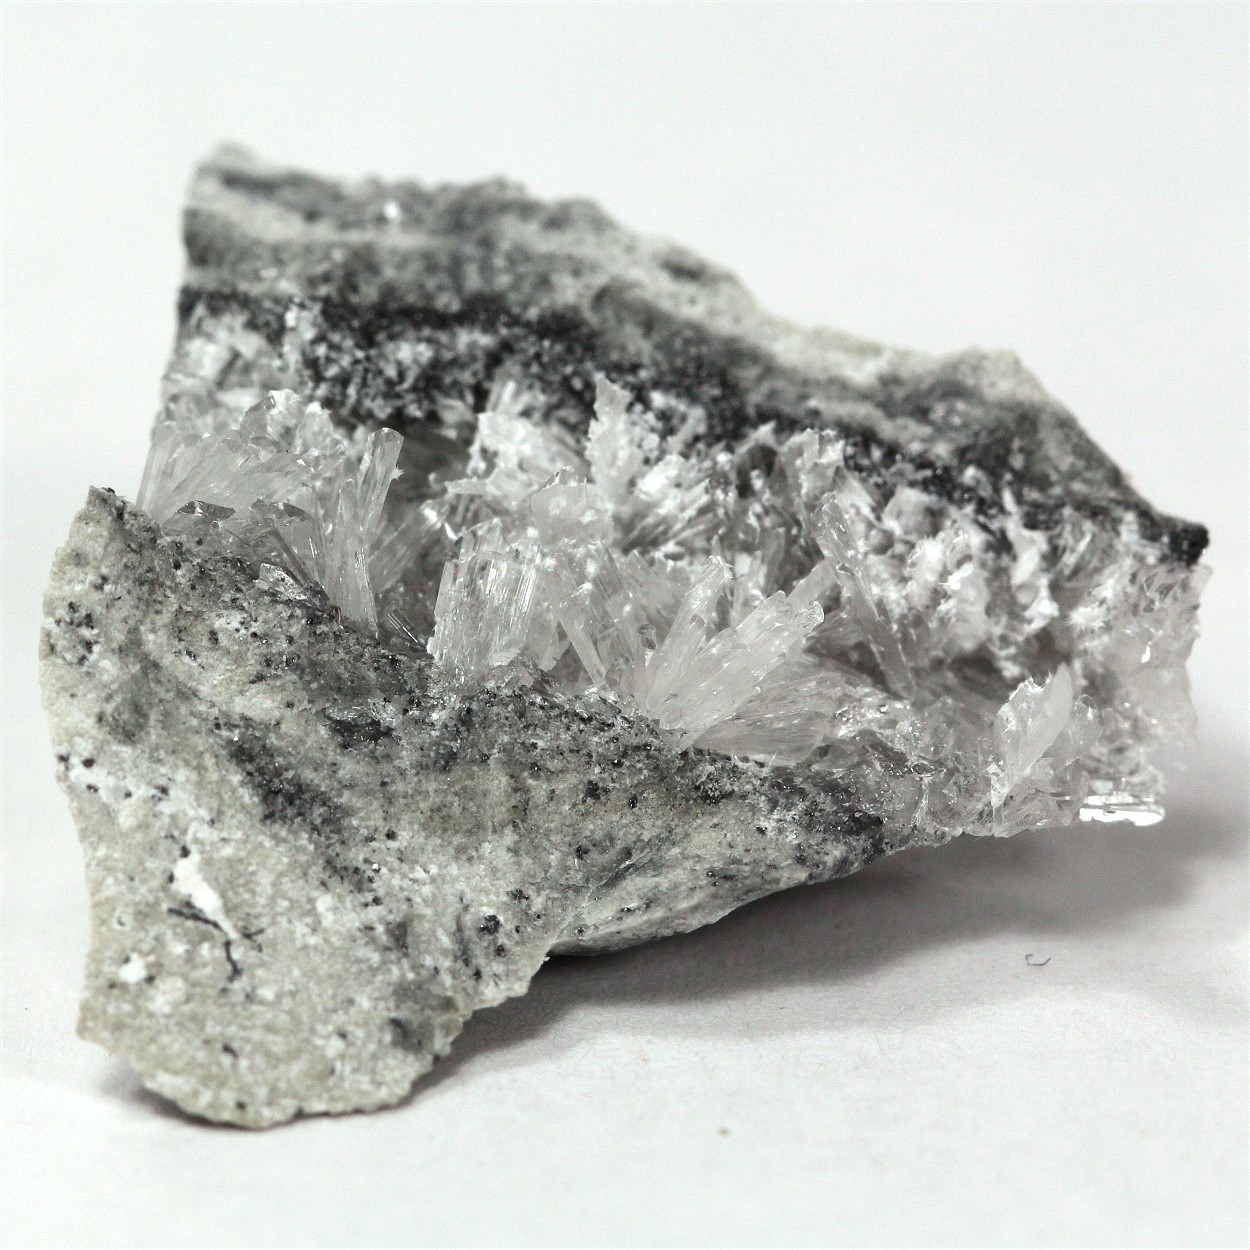 Afwillite With Thaumasite